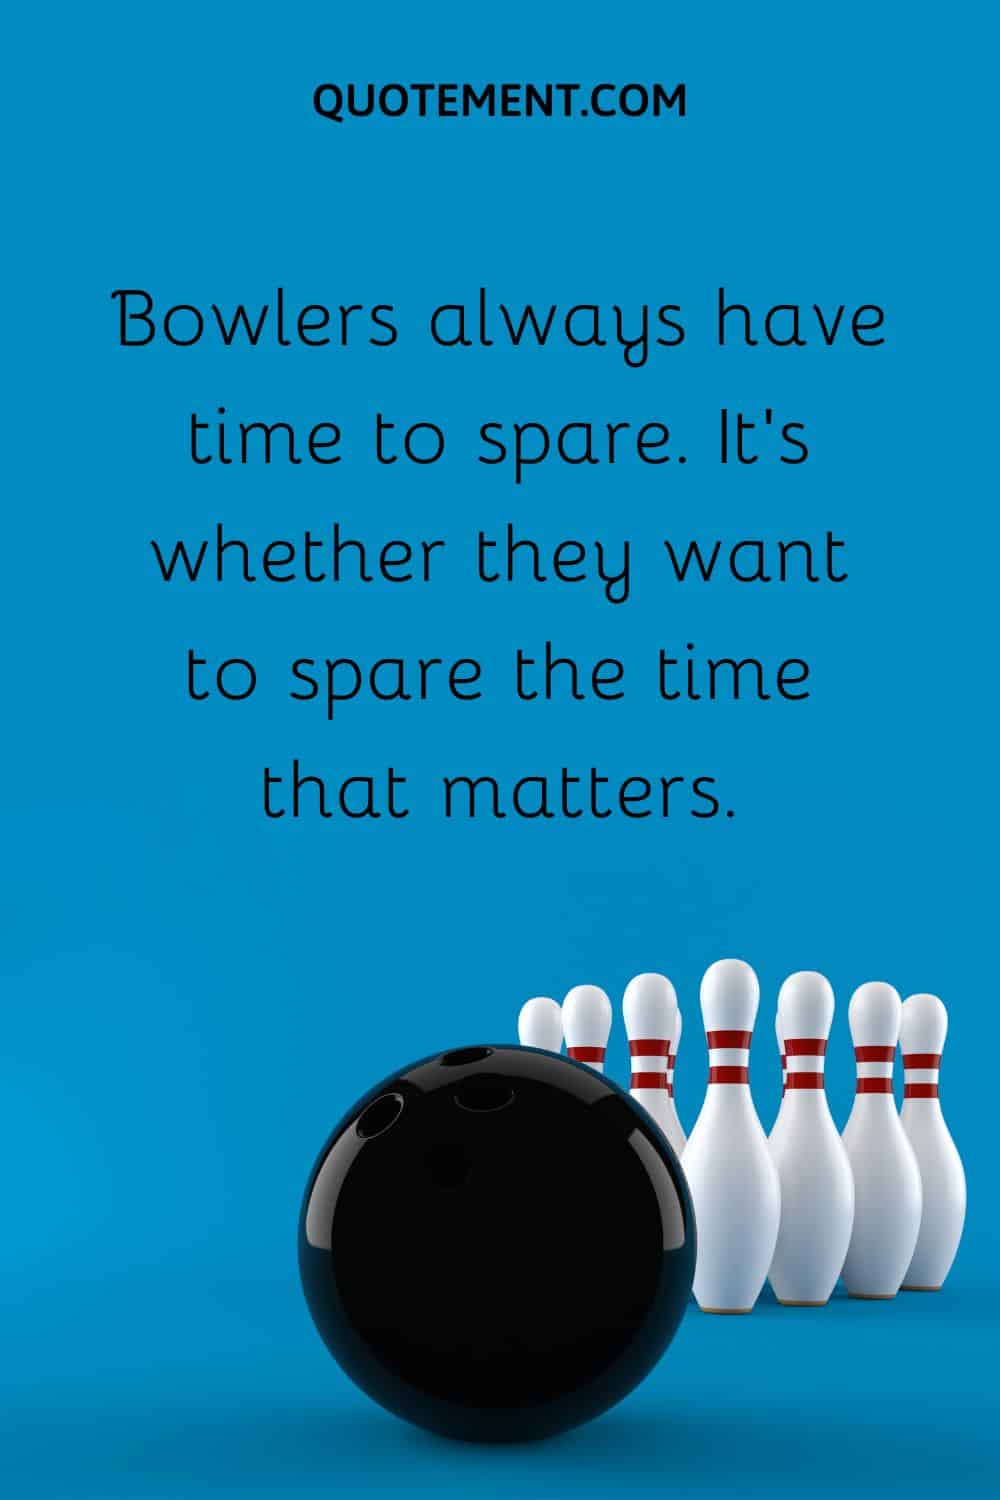 Bowlers always have time to spare